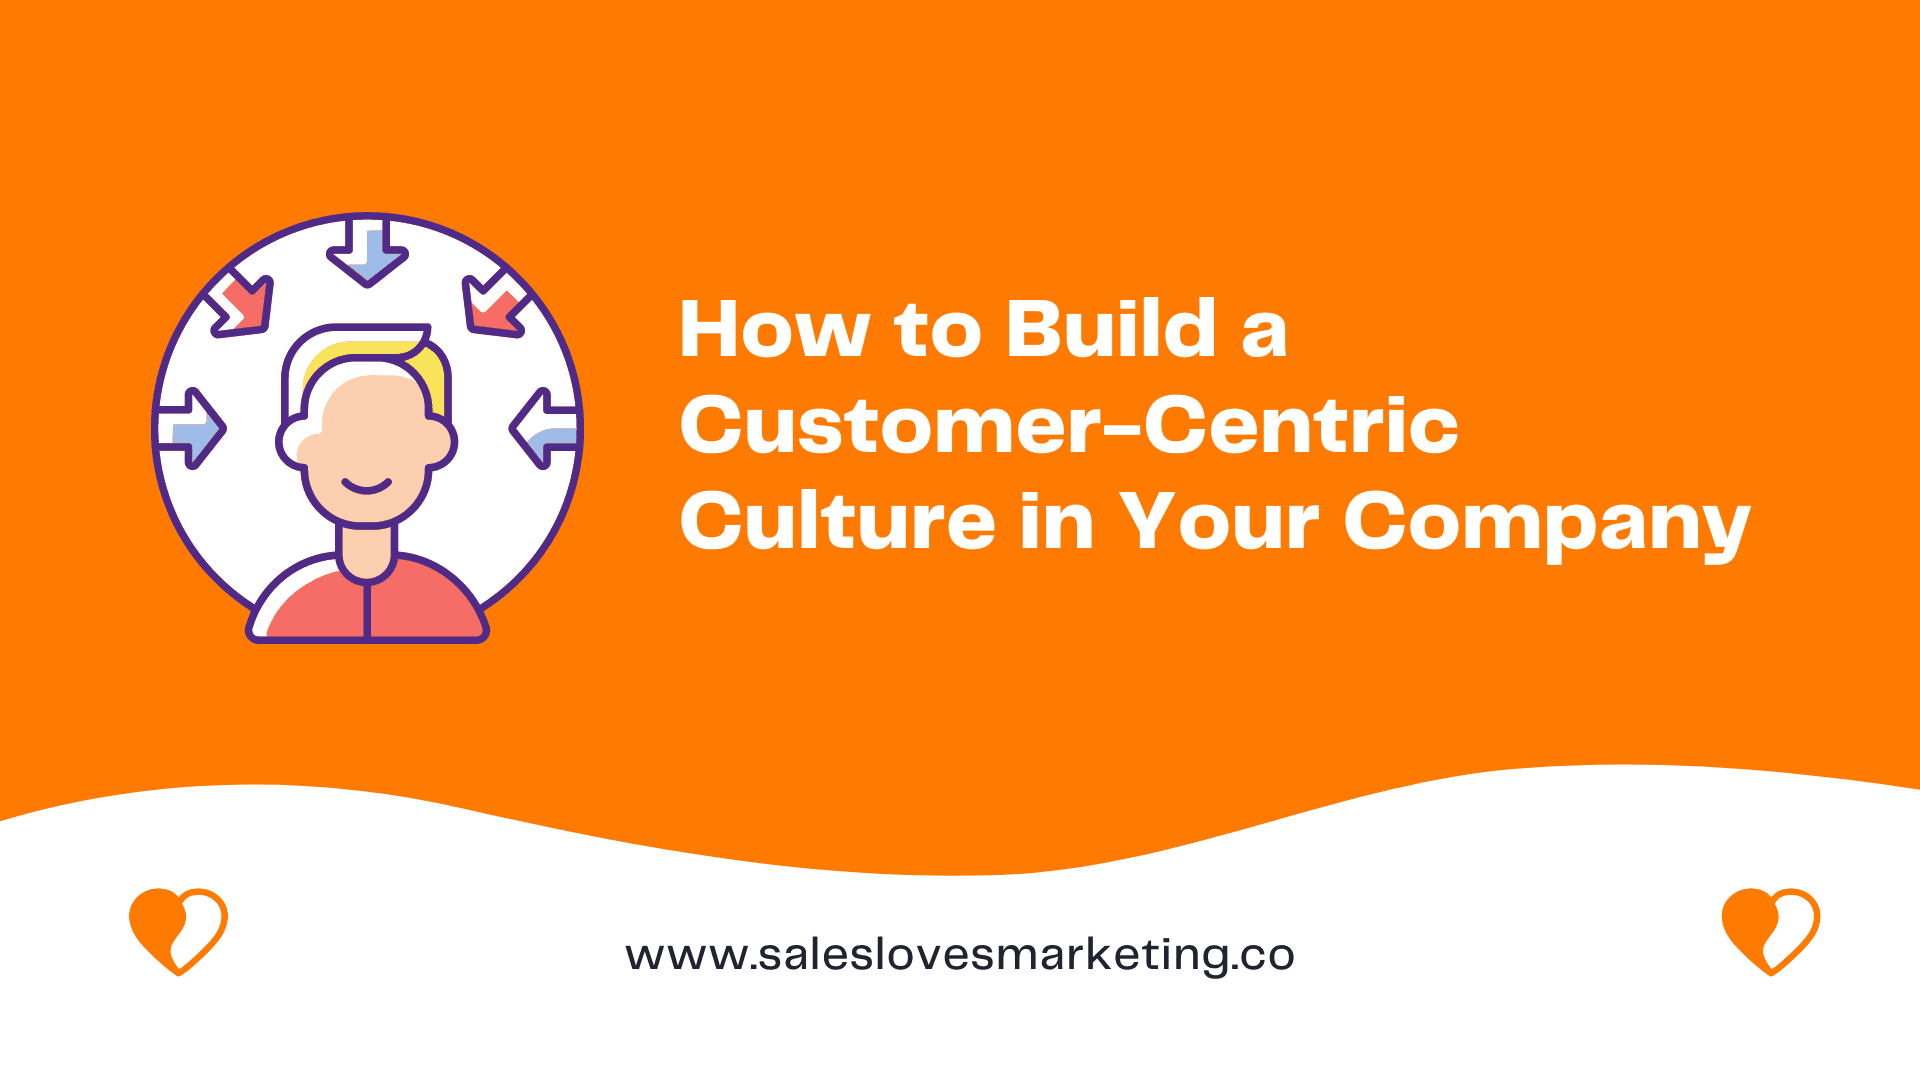 How to Build a Customer-Centric Culture in Your Company